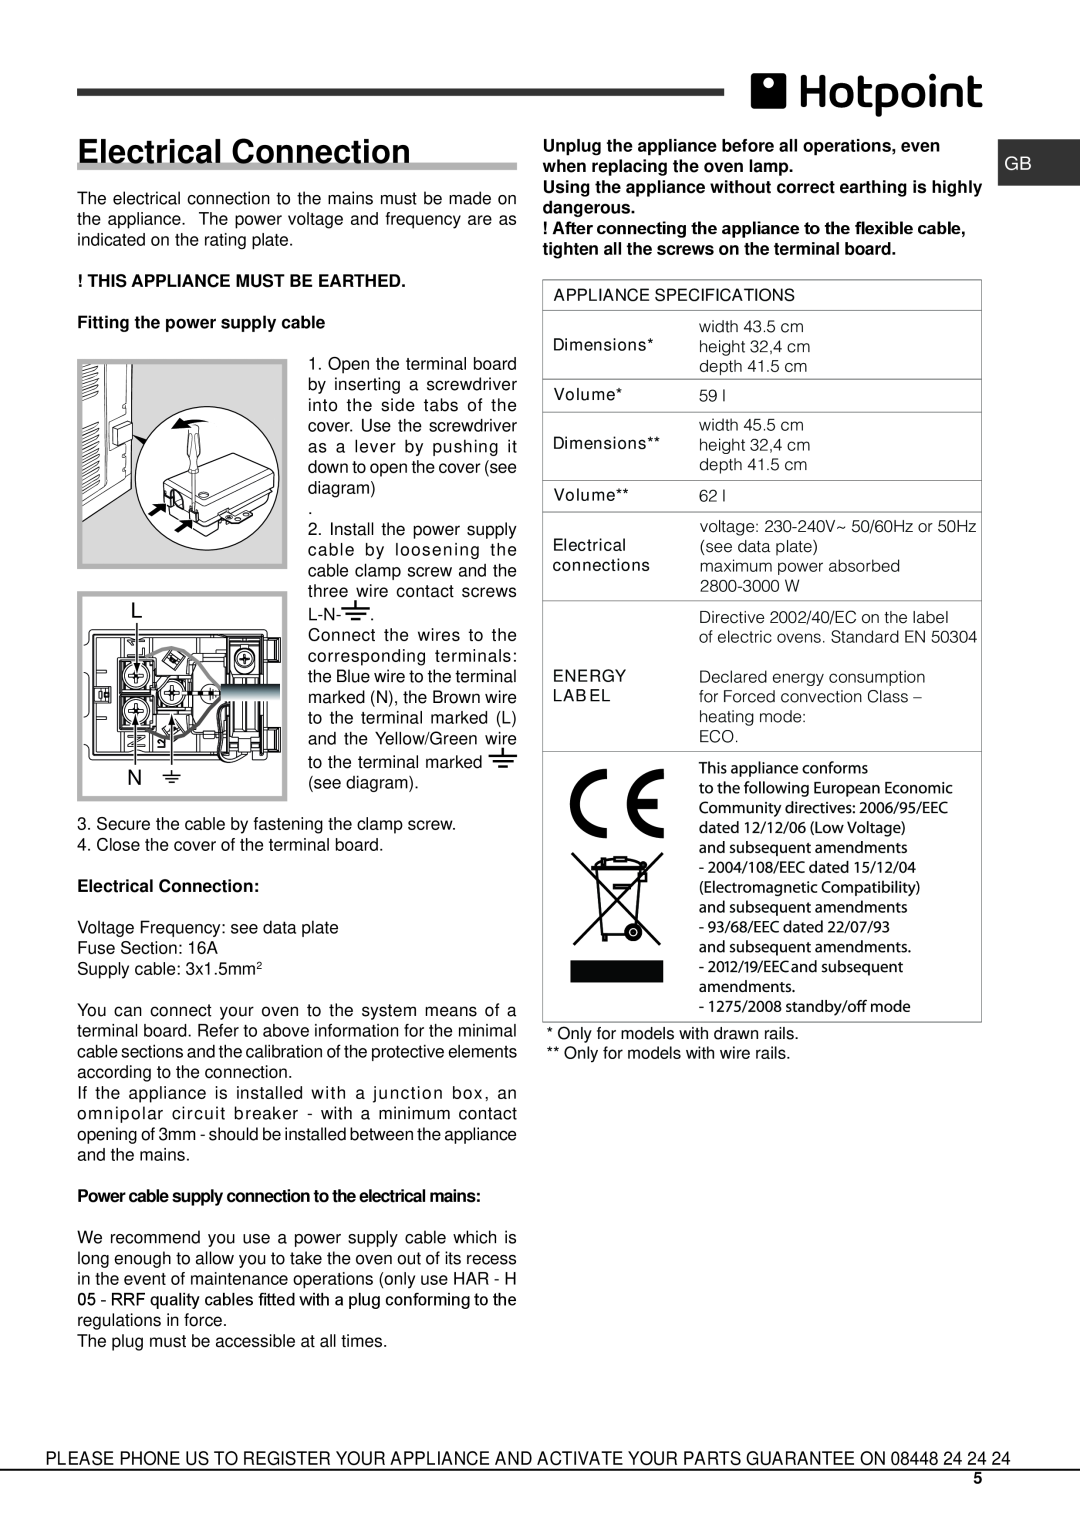 Hotpoint SH 108 CX S manual Electrical Connection 